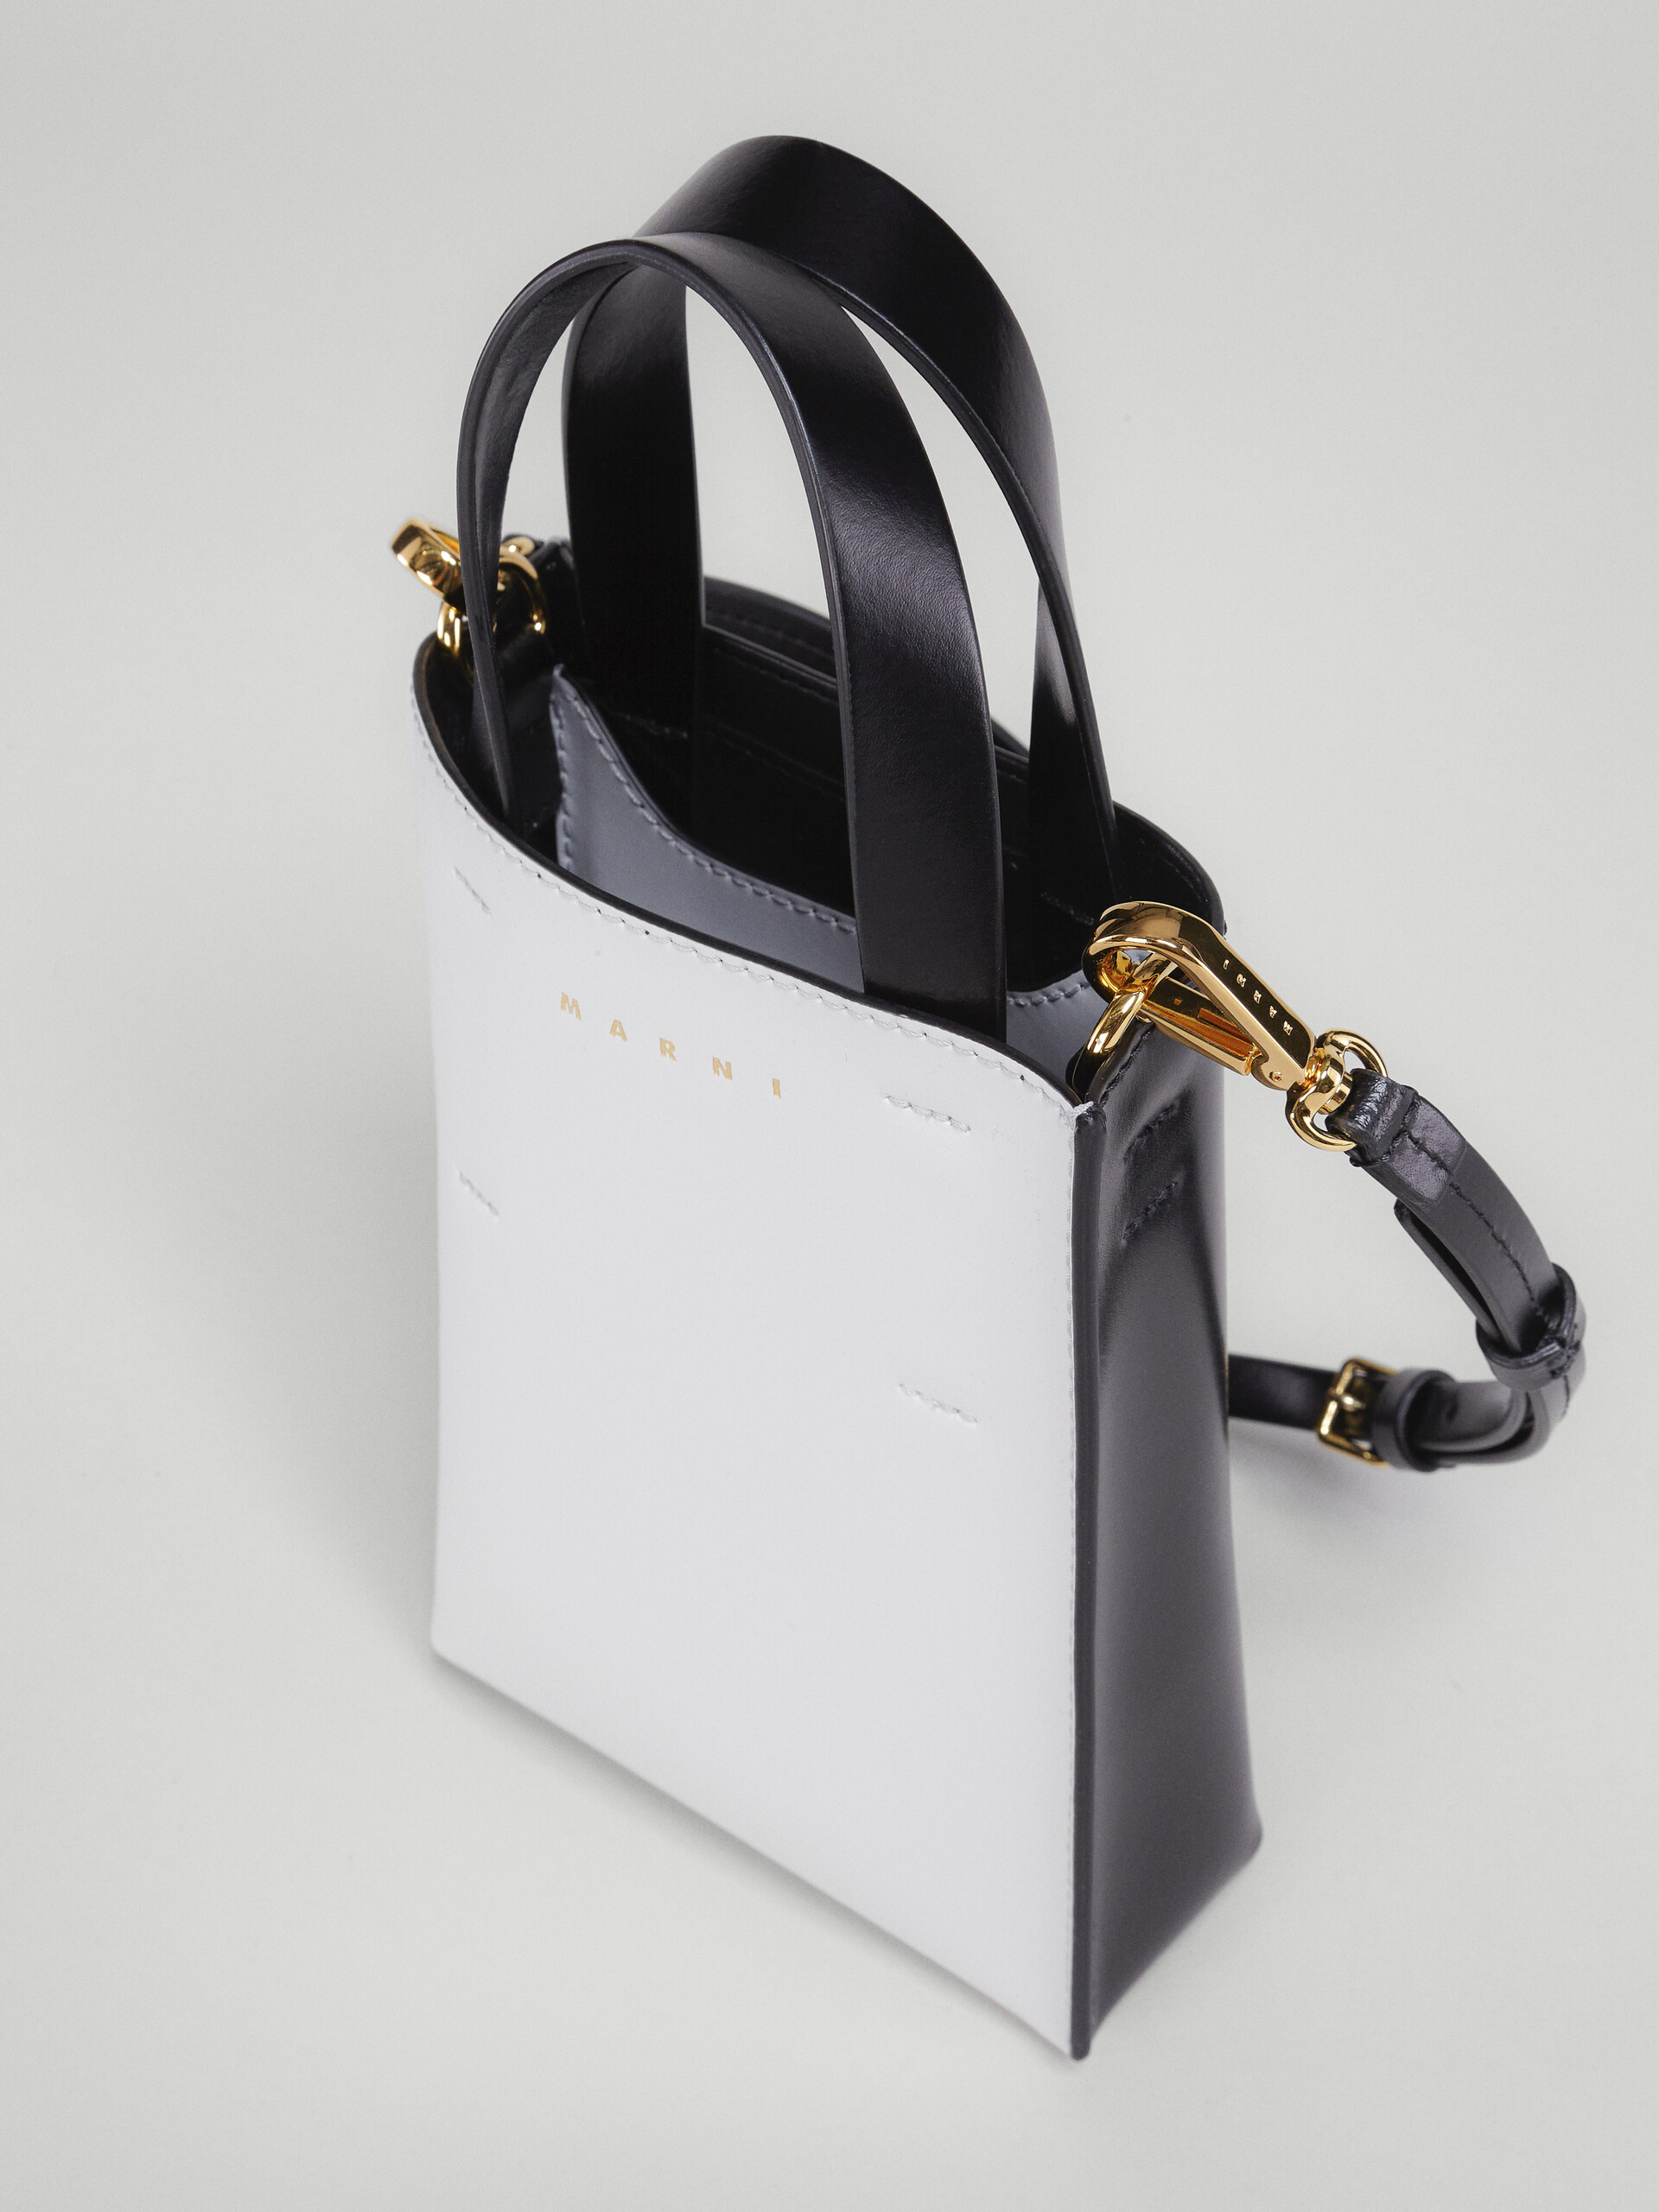 MUSEO nano bag in white and black leather